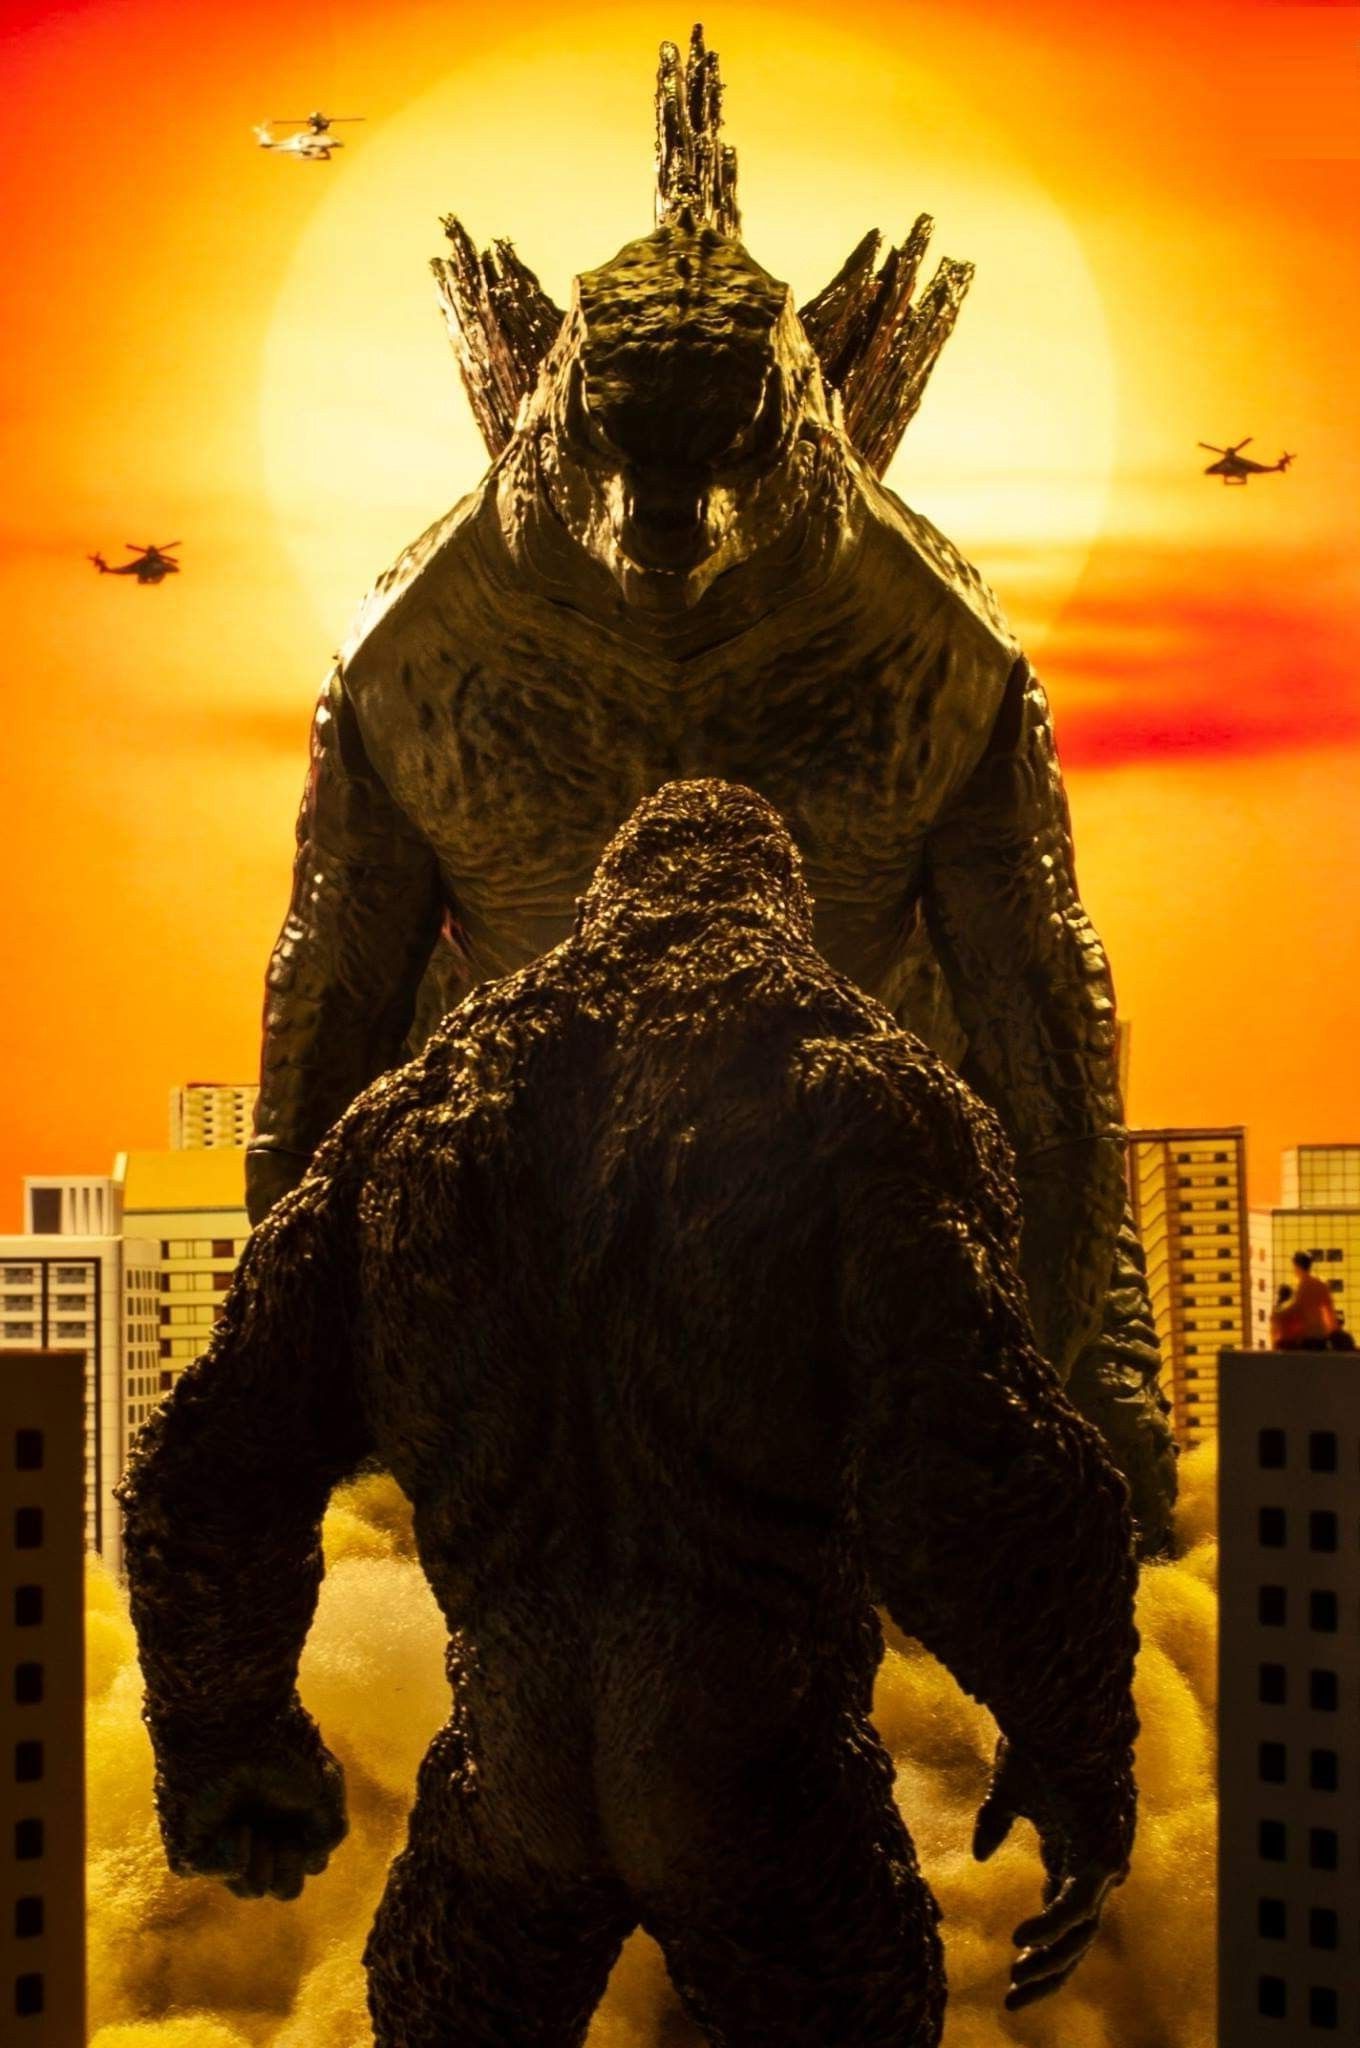 Godzilla vs Kong Wallpaper for mobile phone, tablet, desktop computer and other devices HD and 4K wallpaper. King kong vs godzilla, Godzilla wallpaper, Godzilla